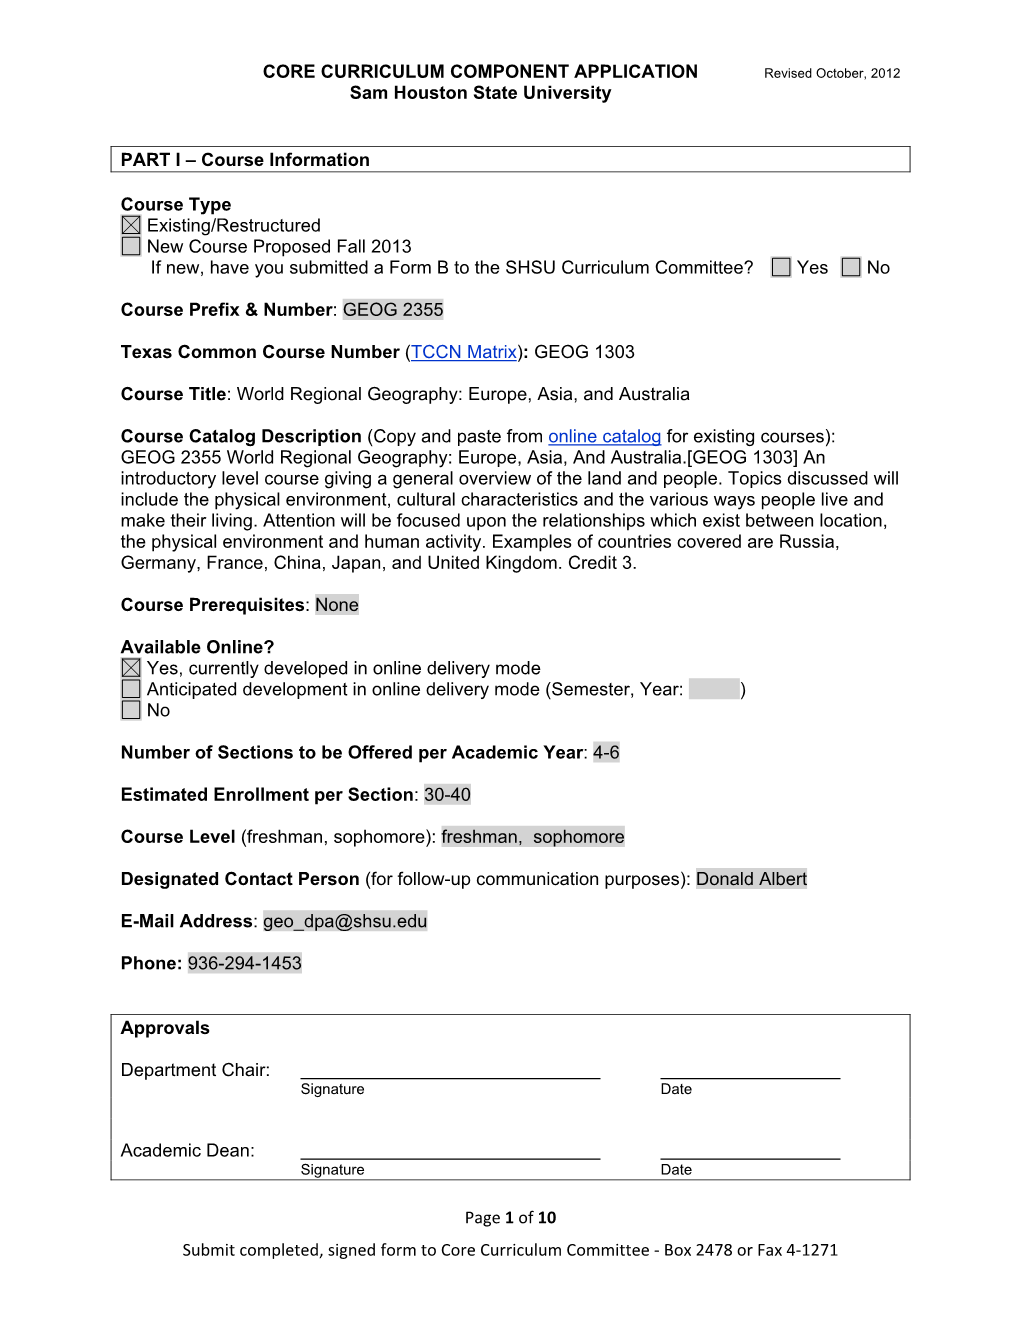 CORE CURRICULUM COMPONENT APPLICATION Sam Houston State University Page 1 of 10 Submit Completed, Signed Form to Core Curricul